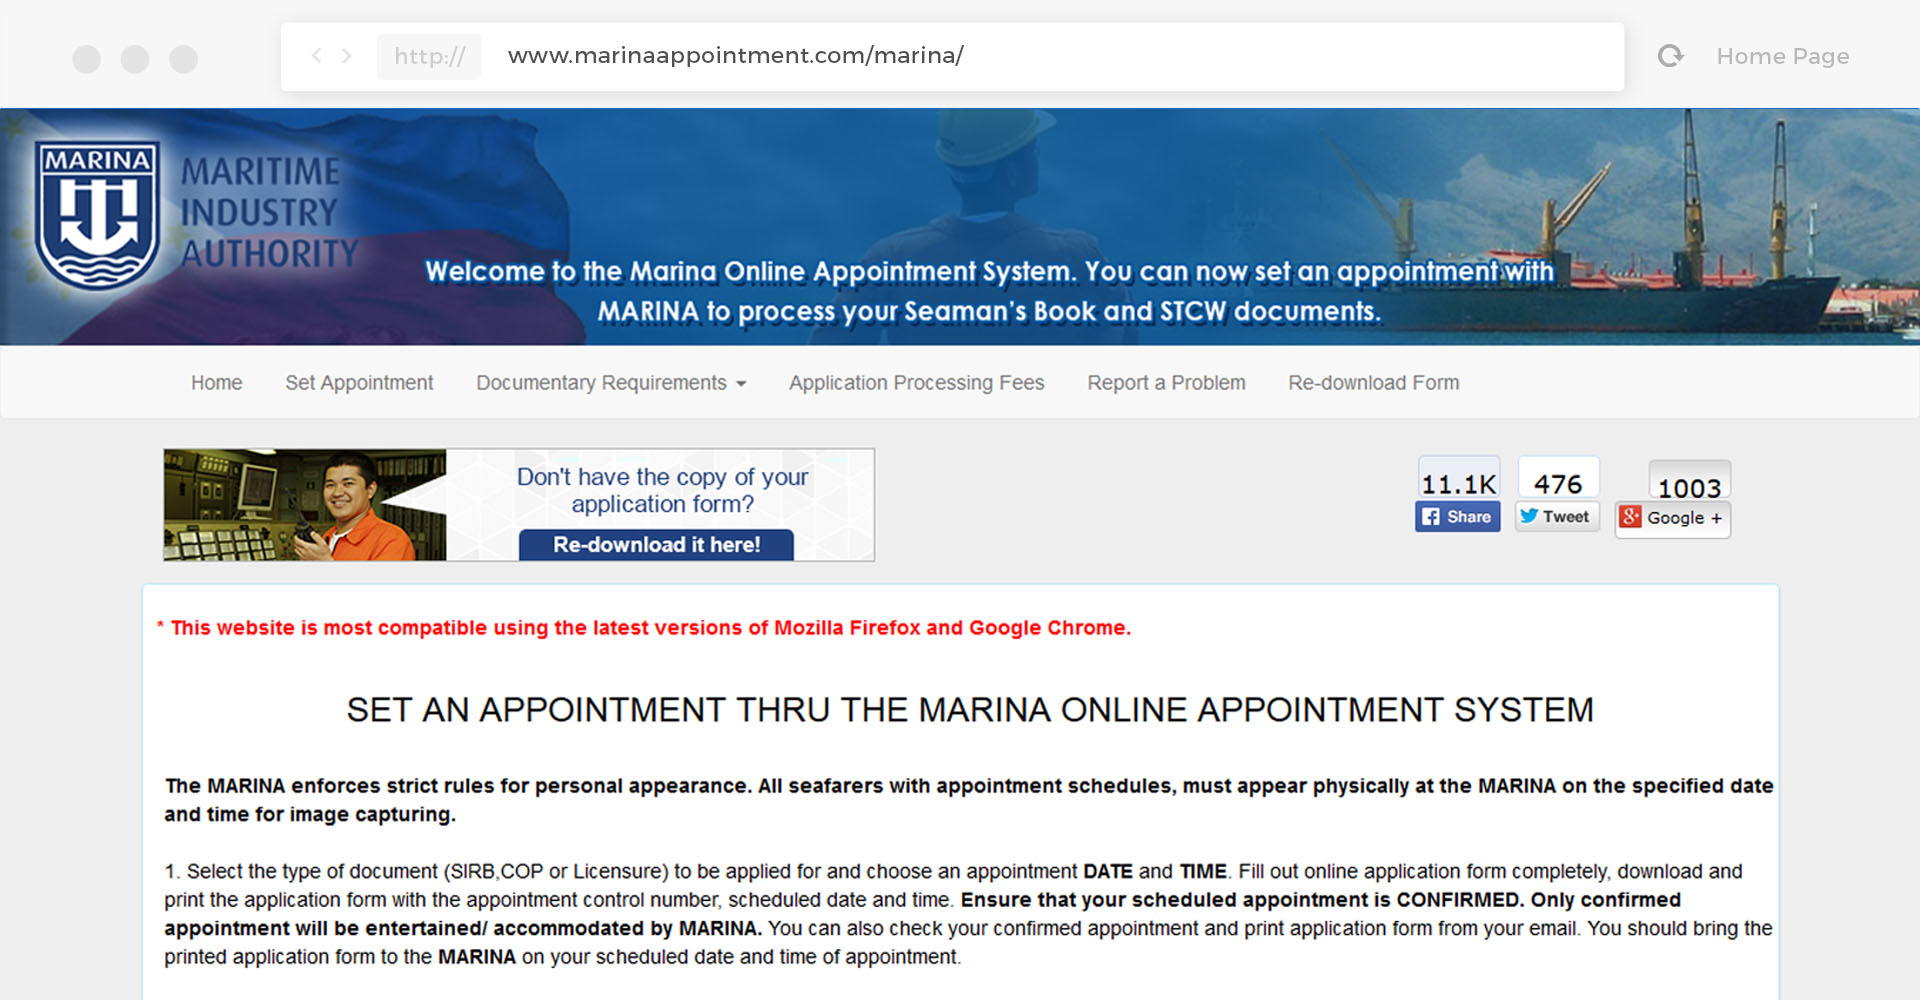 MARINA Online Appointment System